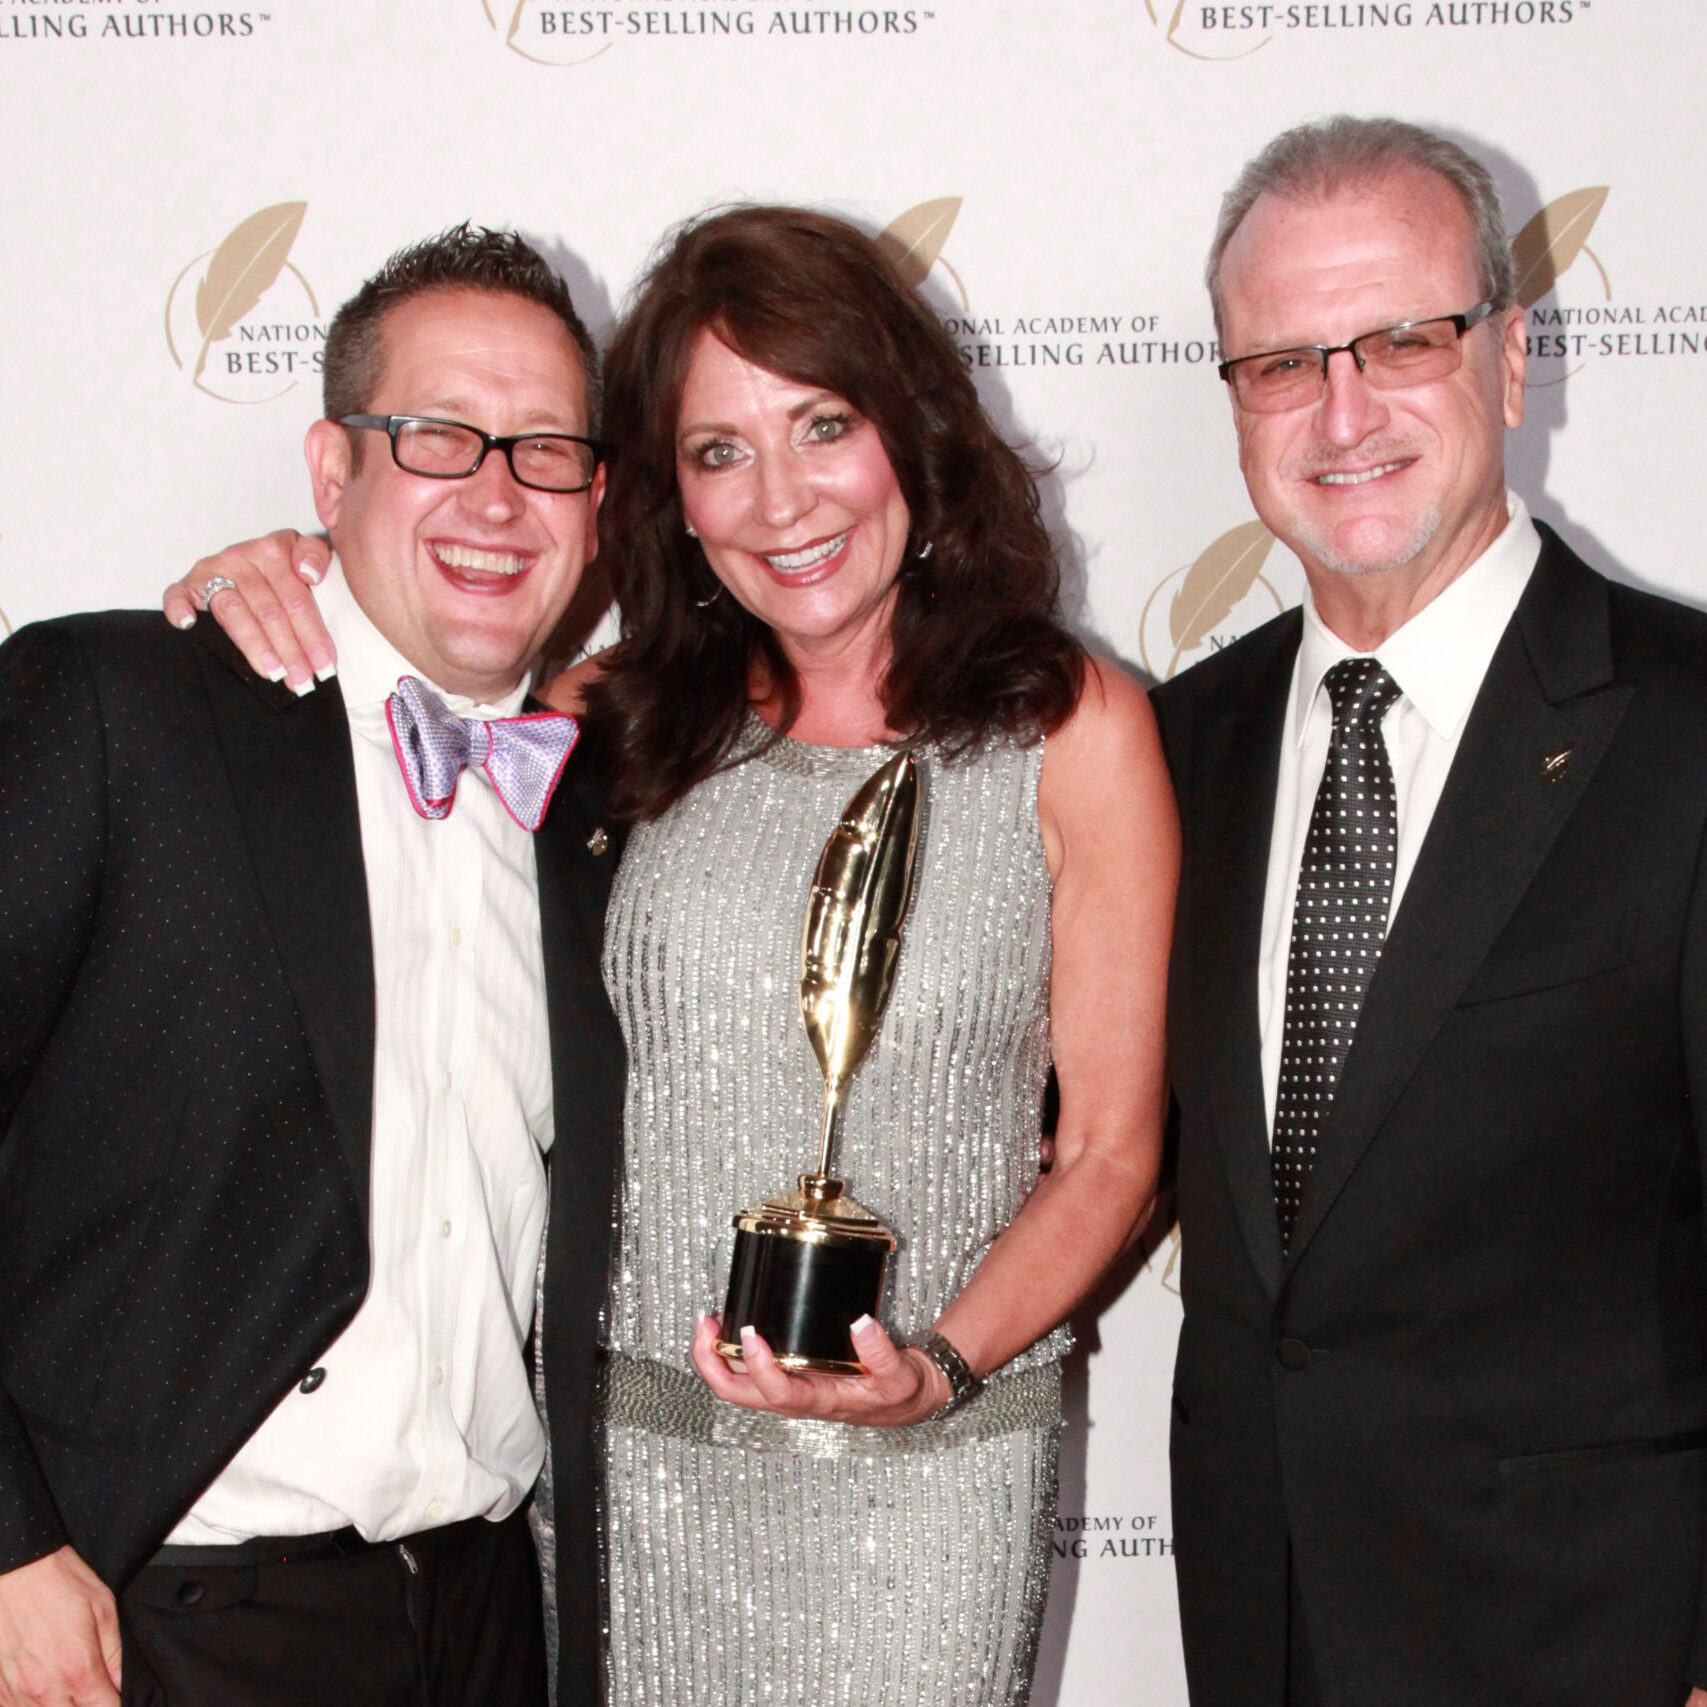 Cindy Ertman holding an award next to two men at a national Academy of best-selling authors event